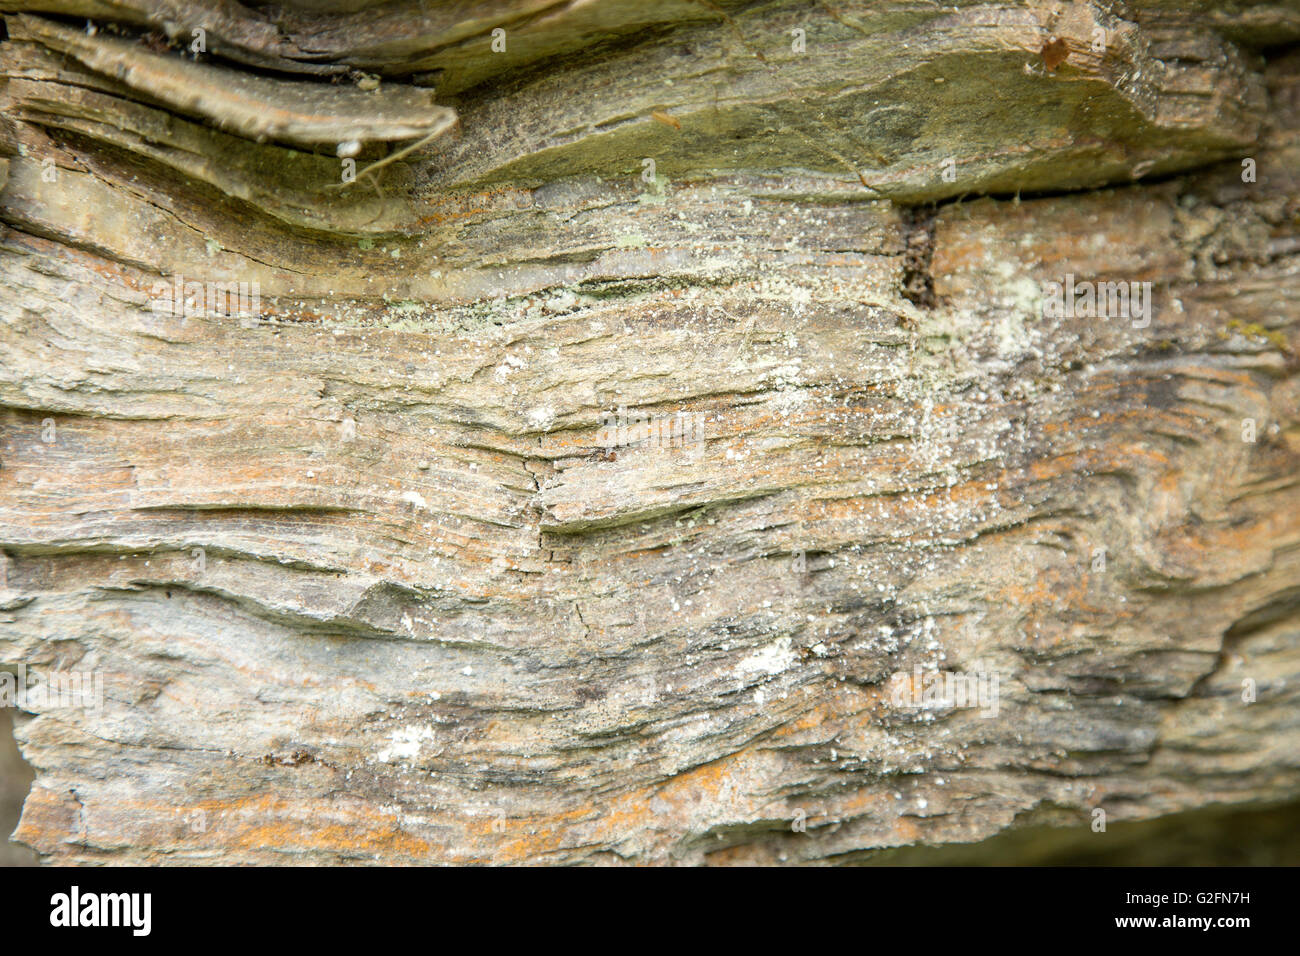 Stratified rock surface texture similar to a tree bark background Stock Photo